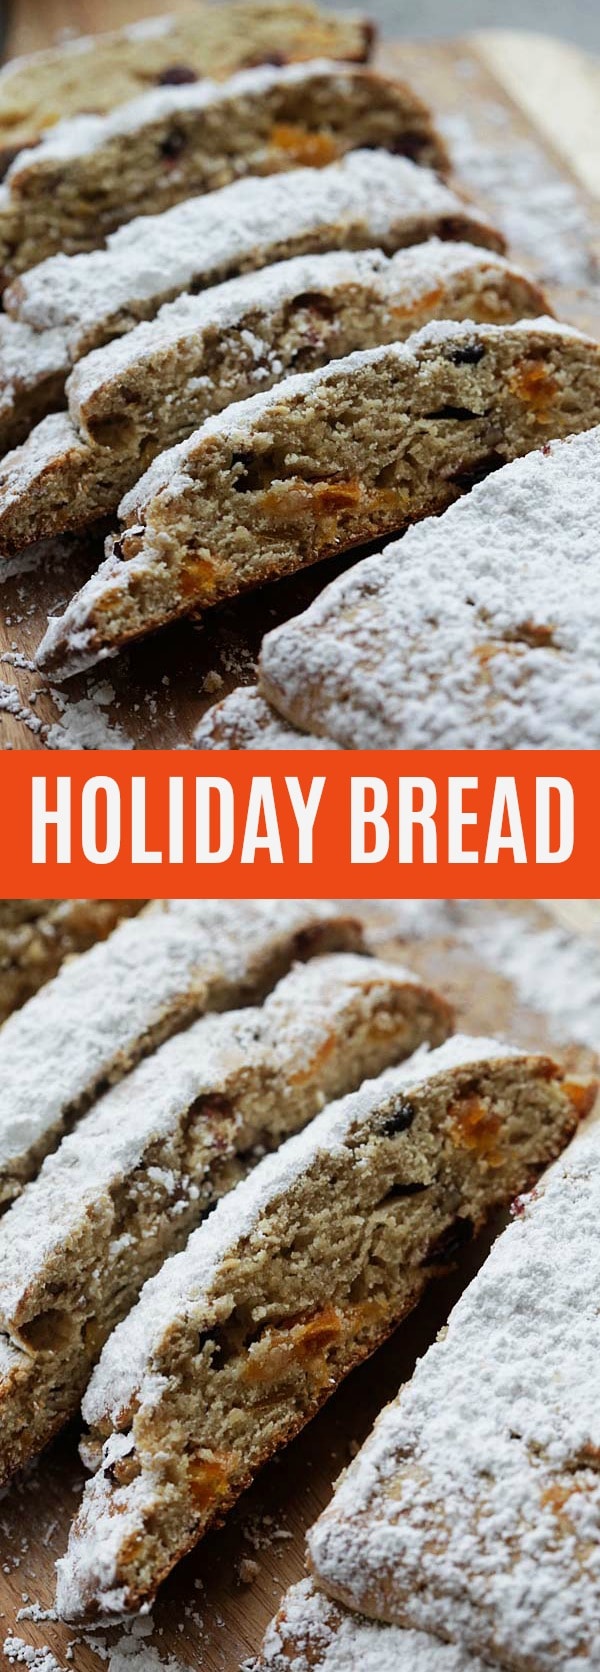 Holiday Bread - delicious homemade holiday bread recipe loaded with pecans and dried fruits. This bread is all you need for holidays | rasamalaysia.com